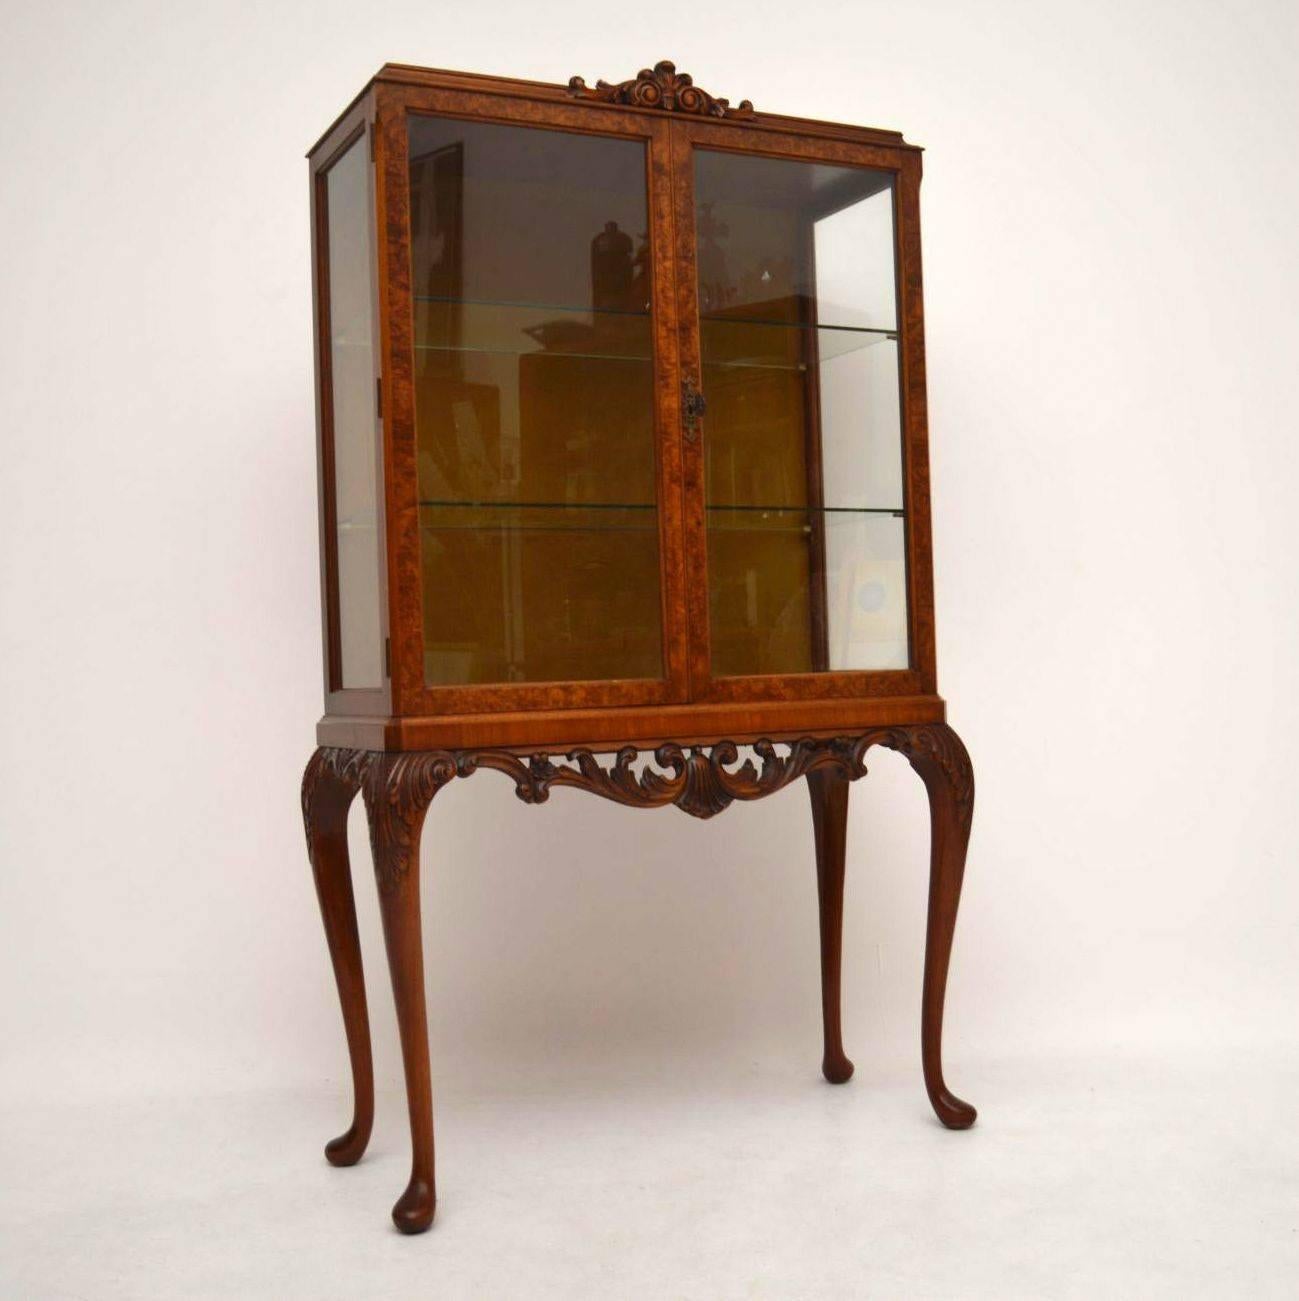 Early 20th Century Antique Burr Walnut Display Cabinet